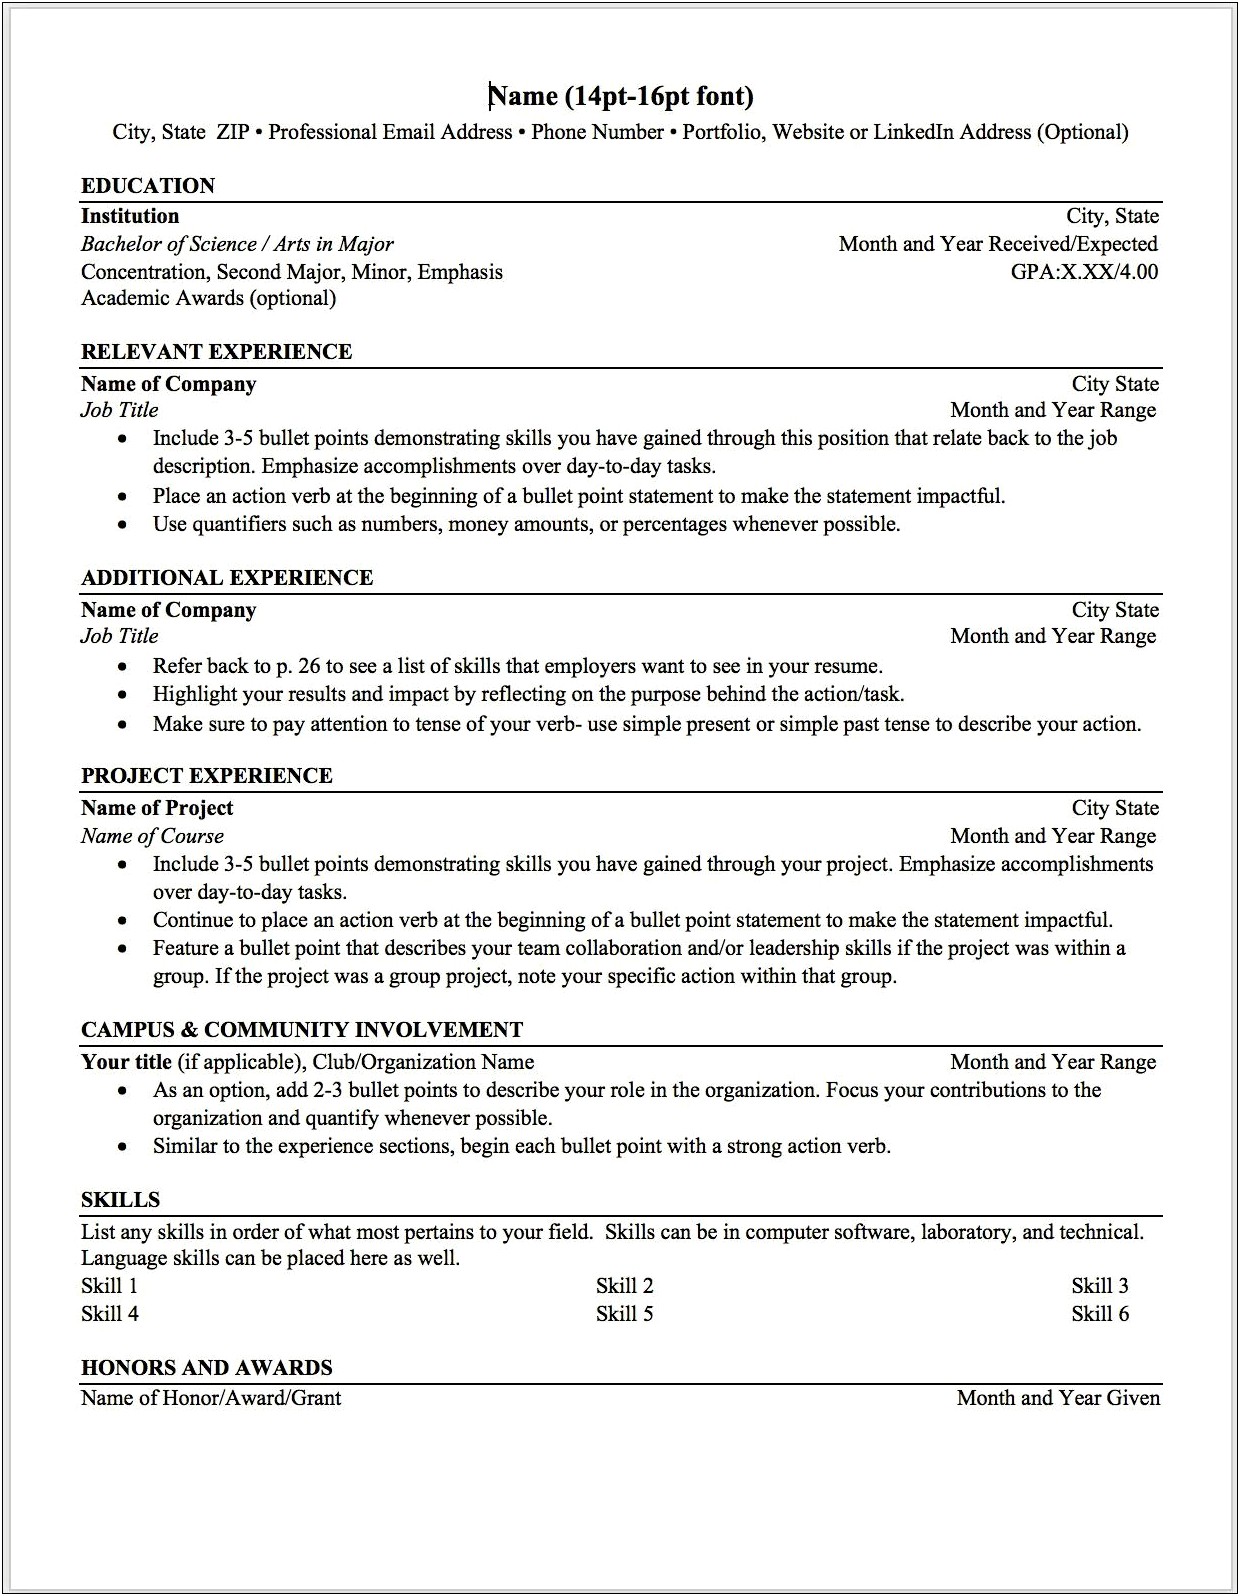 Resume Work Experience In Order Of Relevance